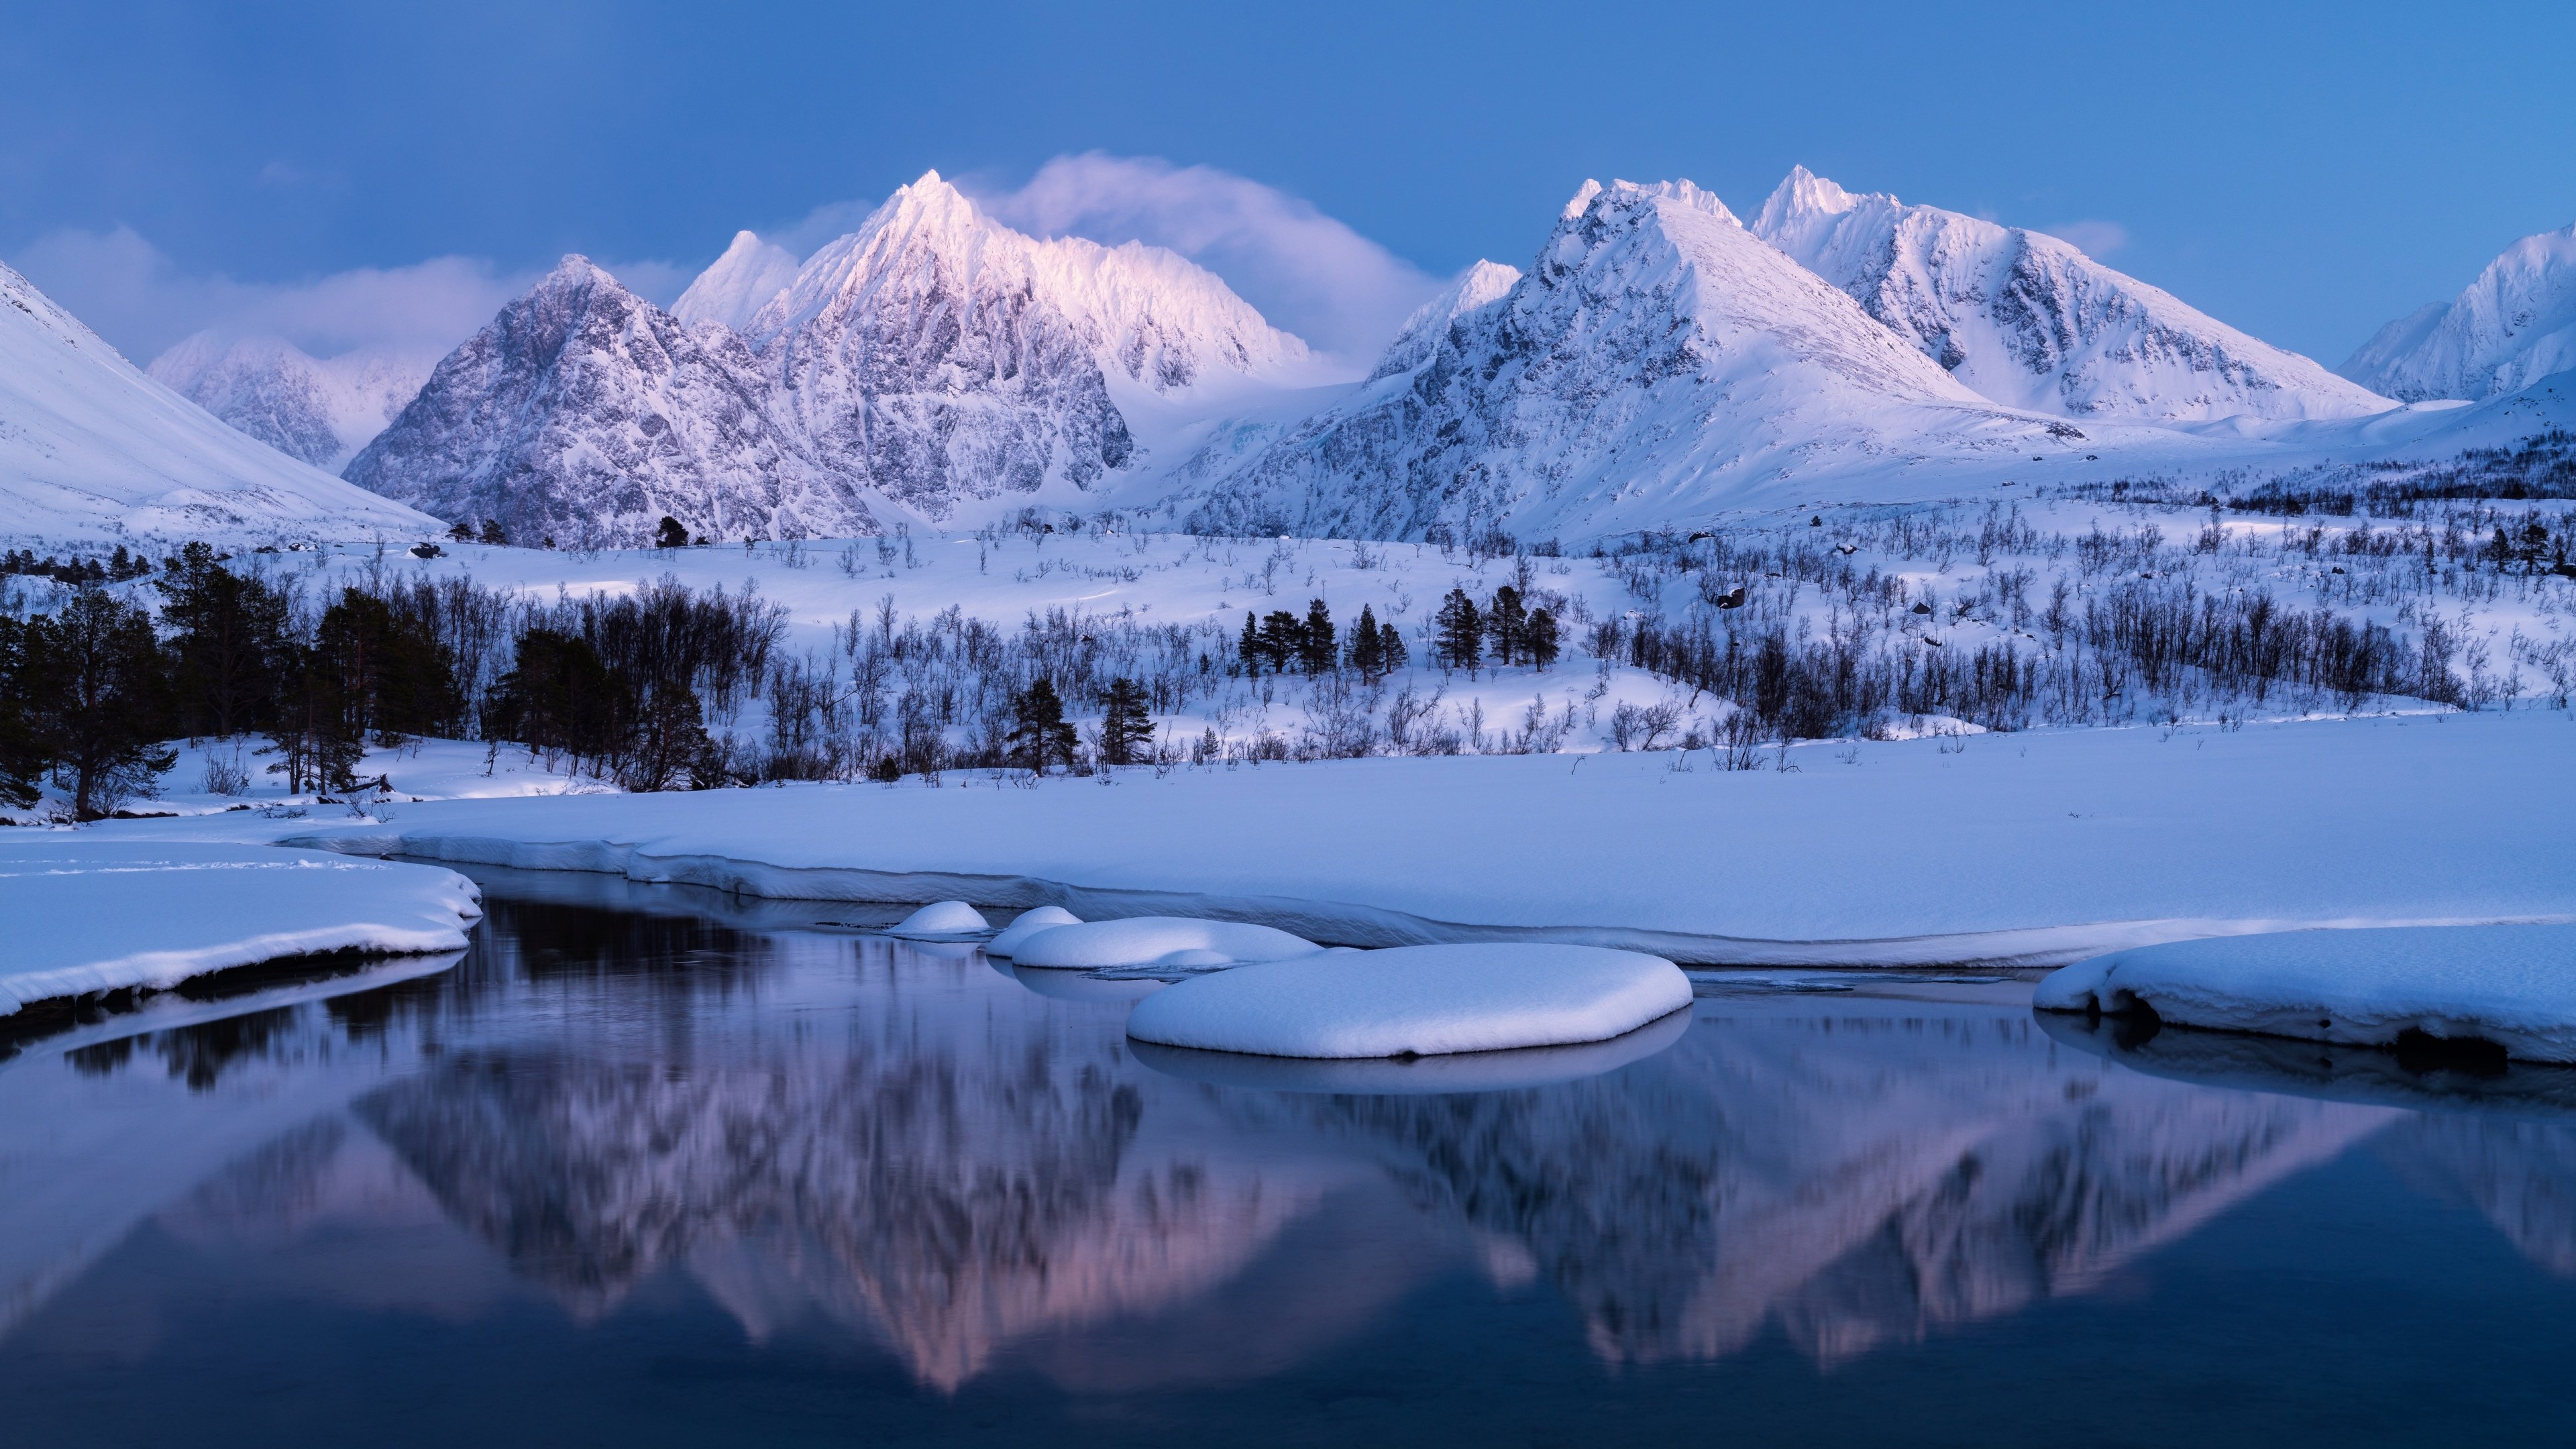 Winter Mountains Wallpaper 4K, Landscape, Lake, Cold, Snow covered, Scenery, Nature